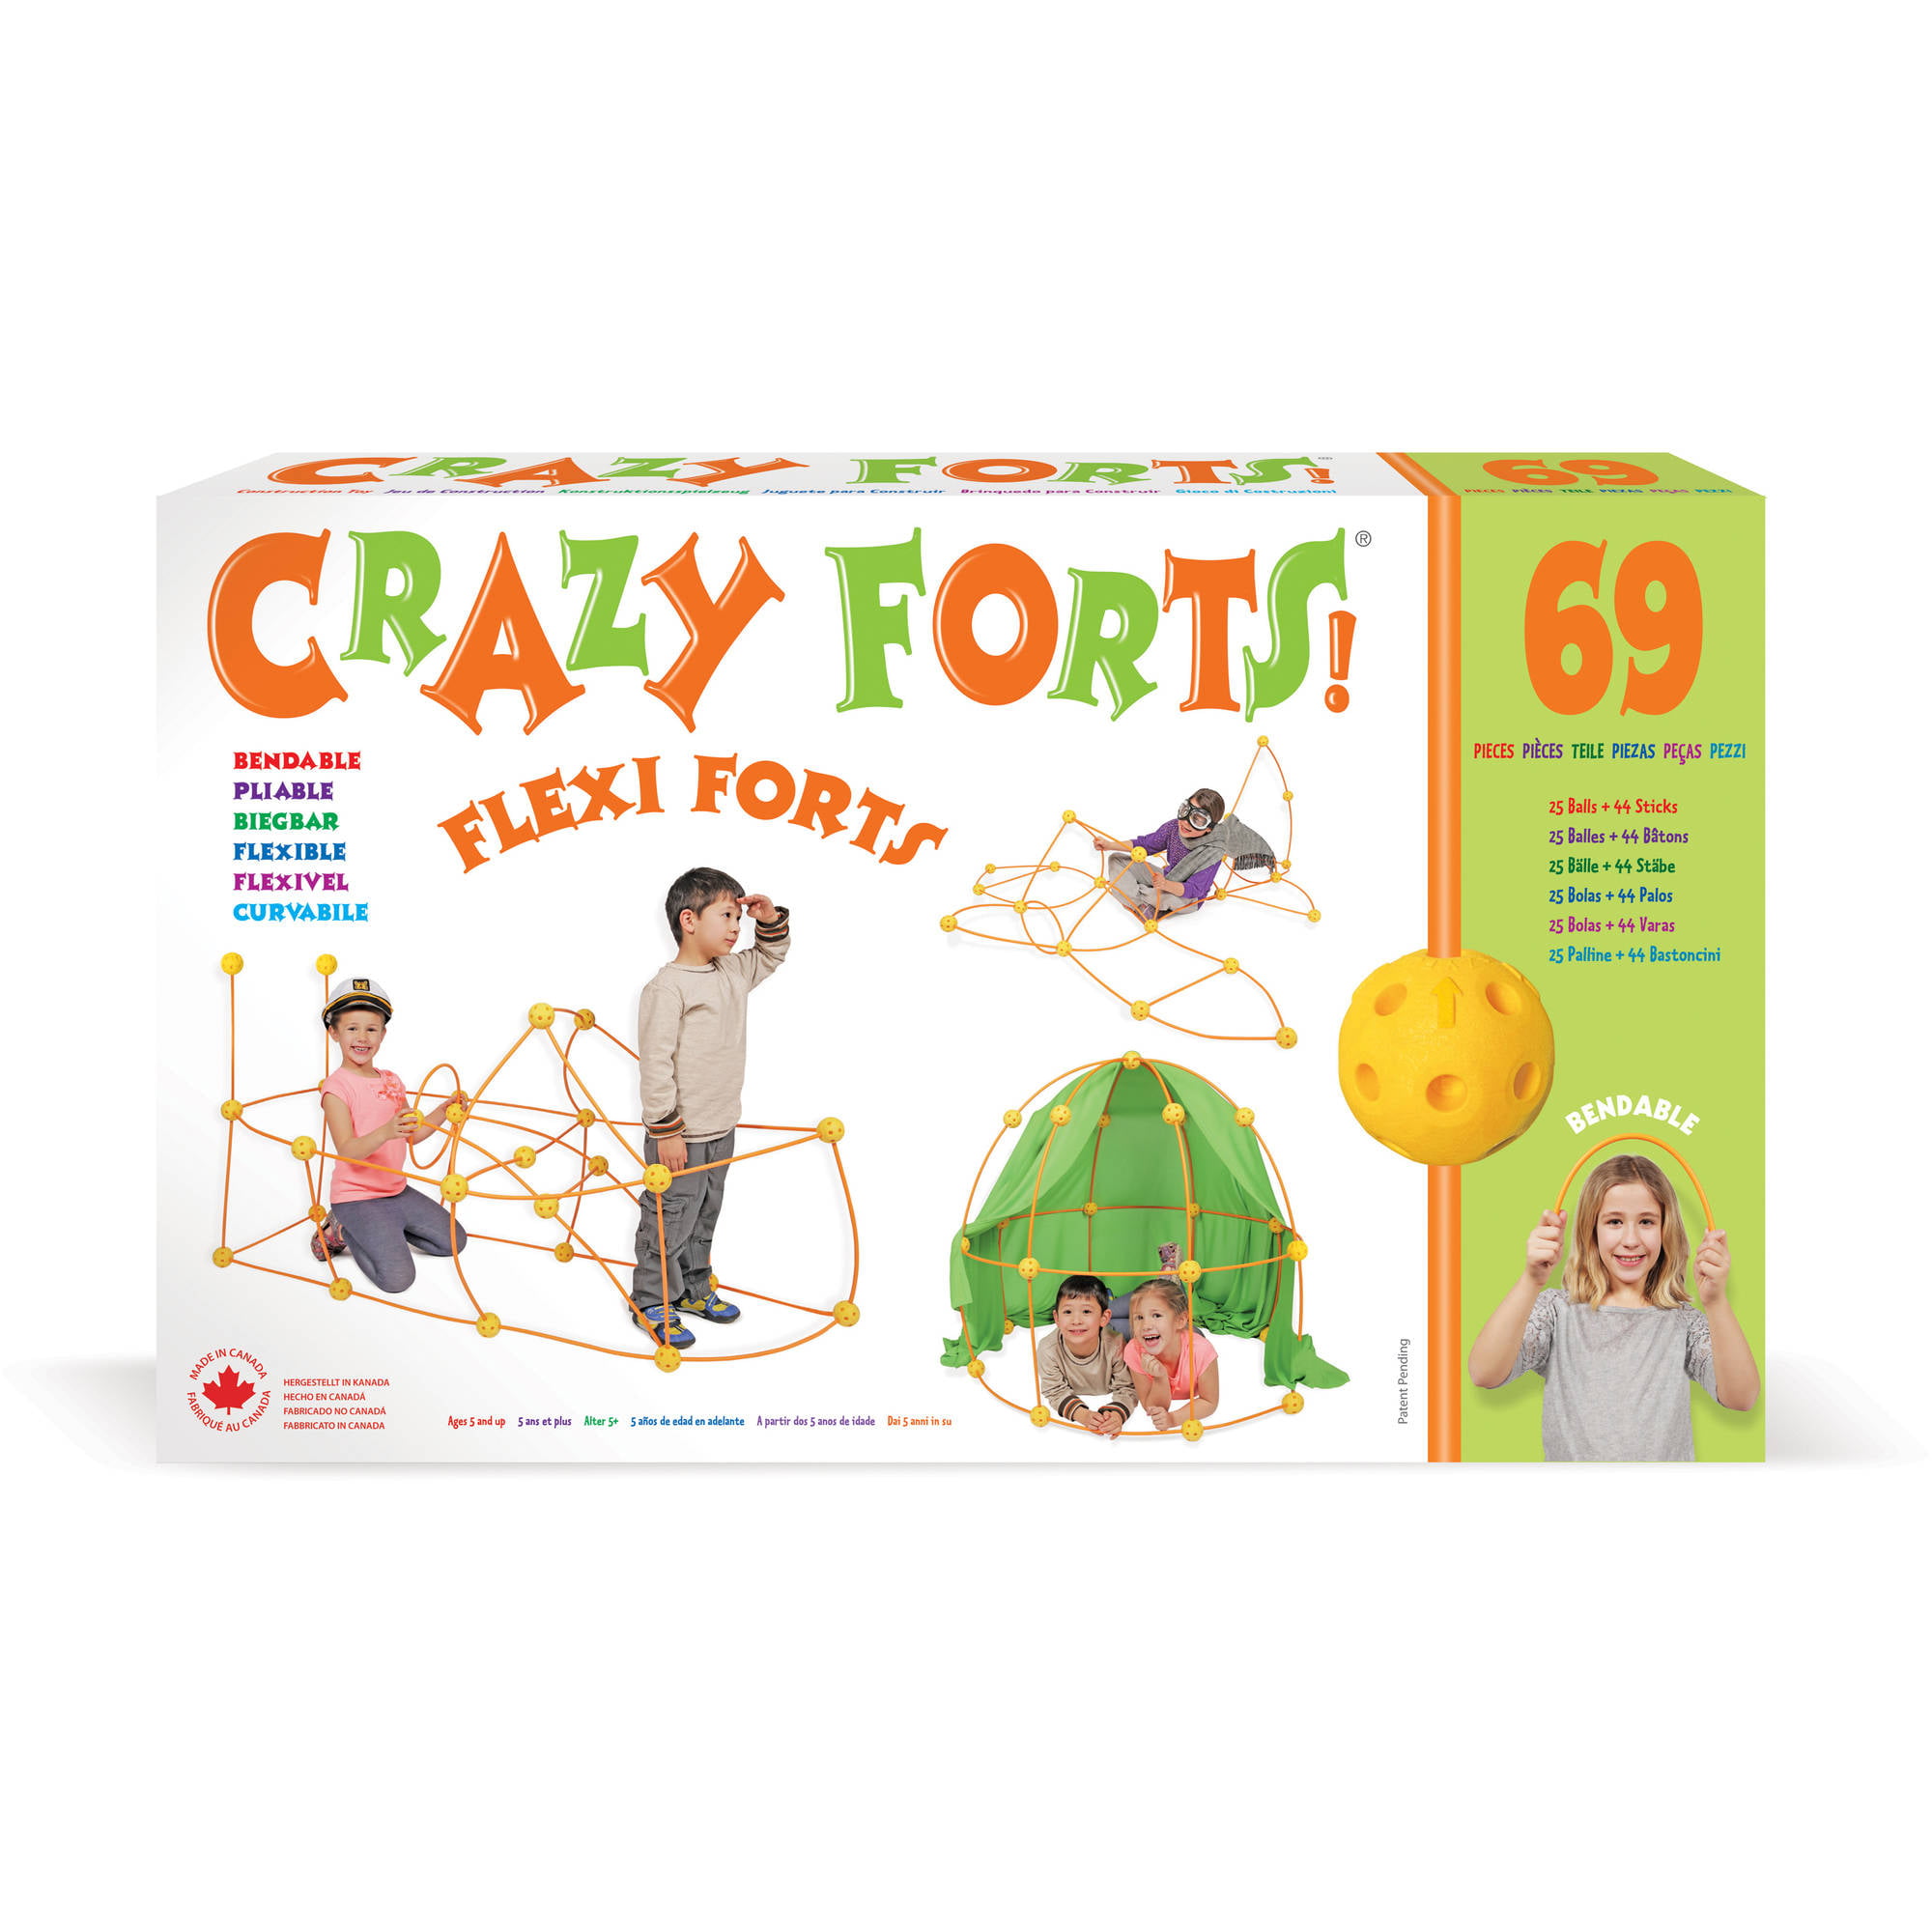 Crazy Forts Princess Playset 69 pc Set for Building Home Fort Tents by Everest 